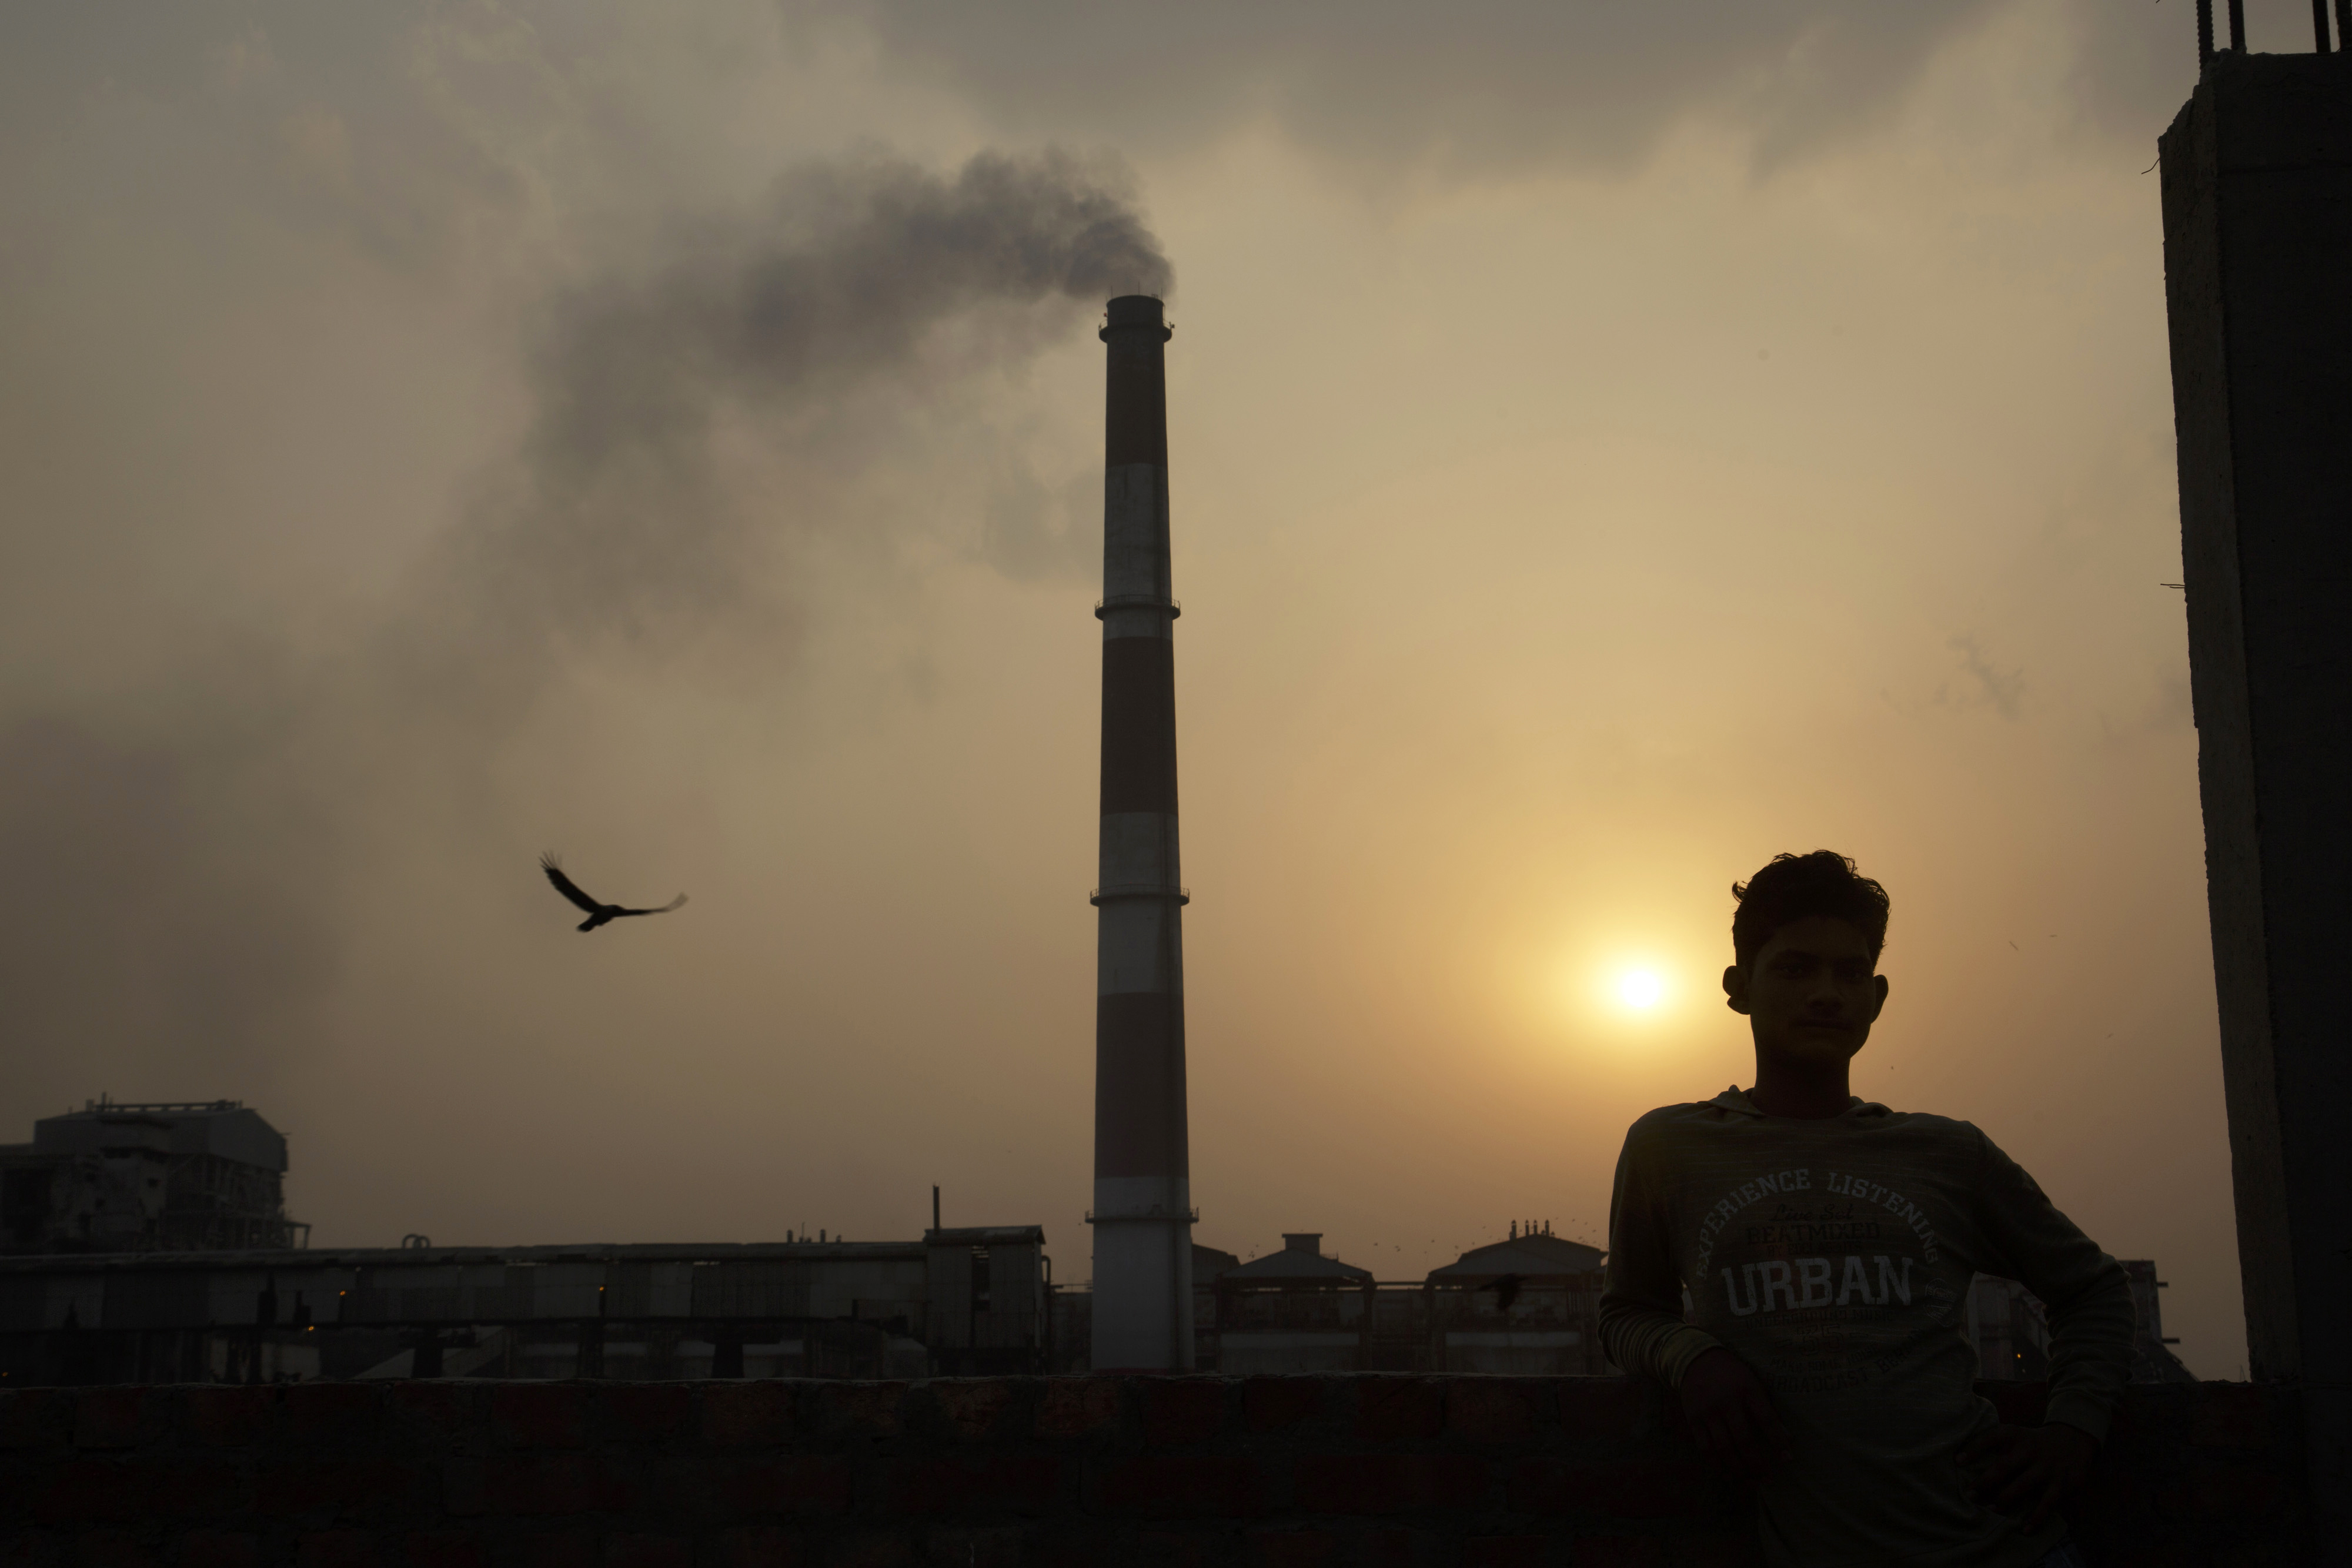 Emissions billow from smokestacks at the NTPC Ltd. Badarpur coal-fired power plant as the sun sets in Badarpur, Delhi, India, on Tuesday, April 28, 2015. (Bloomberg—Bloomberg via Getty Images)